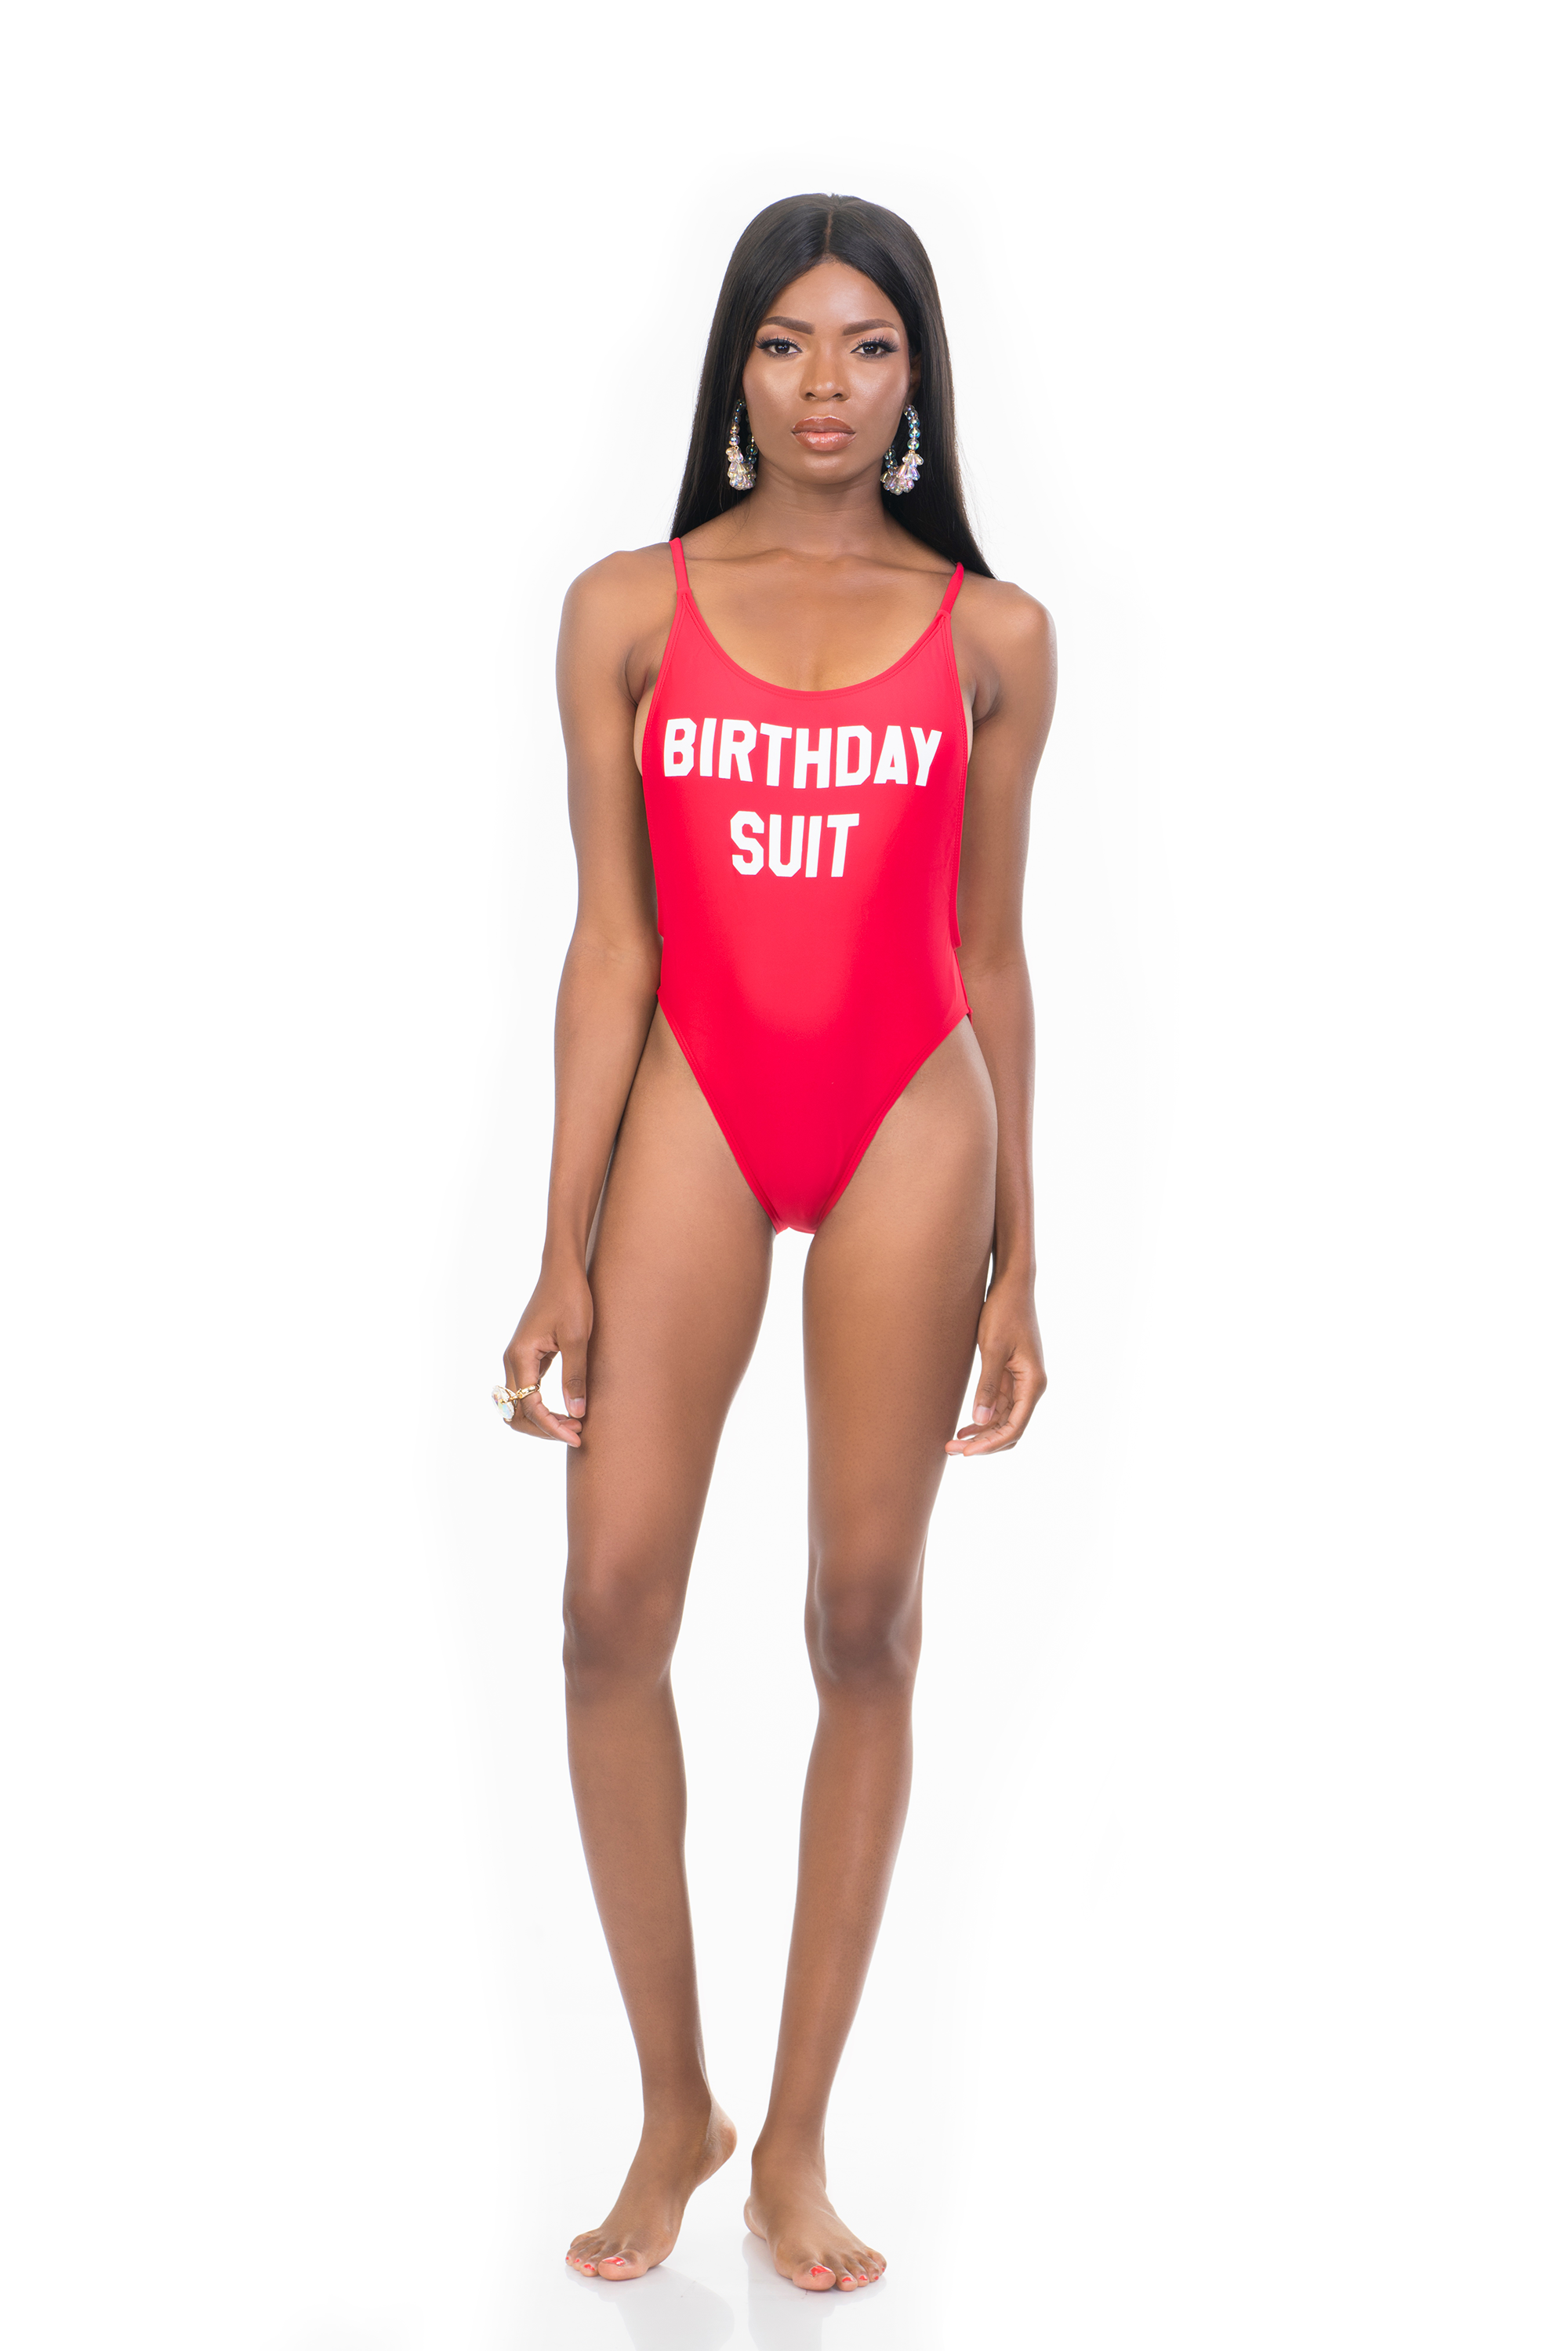 ben edkin recommends women in their birthday suit pic